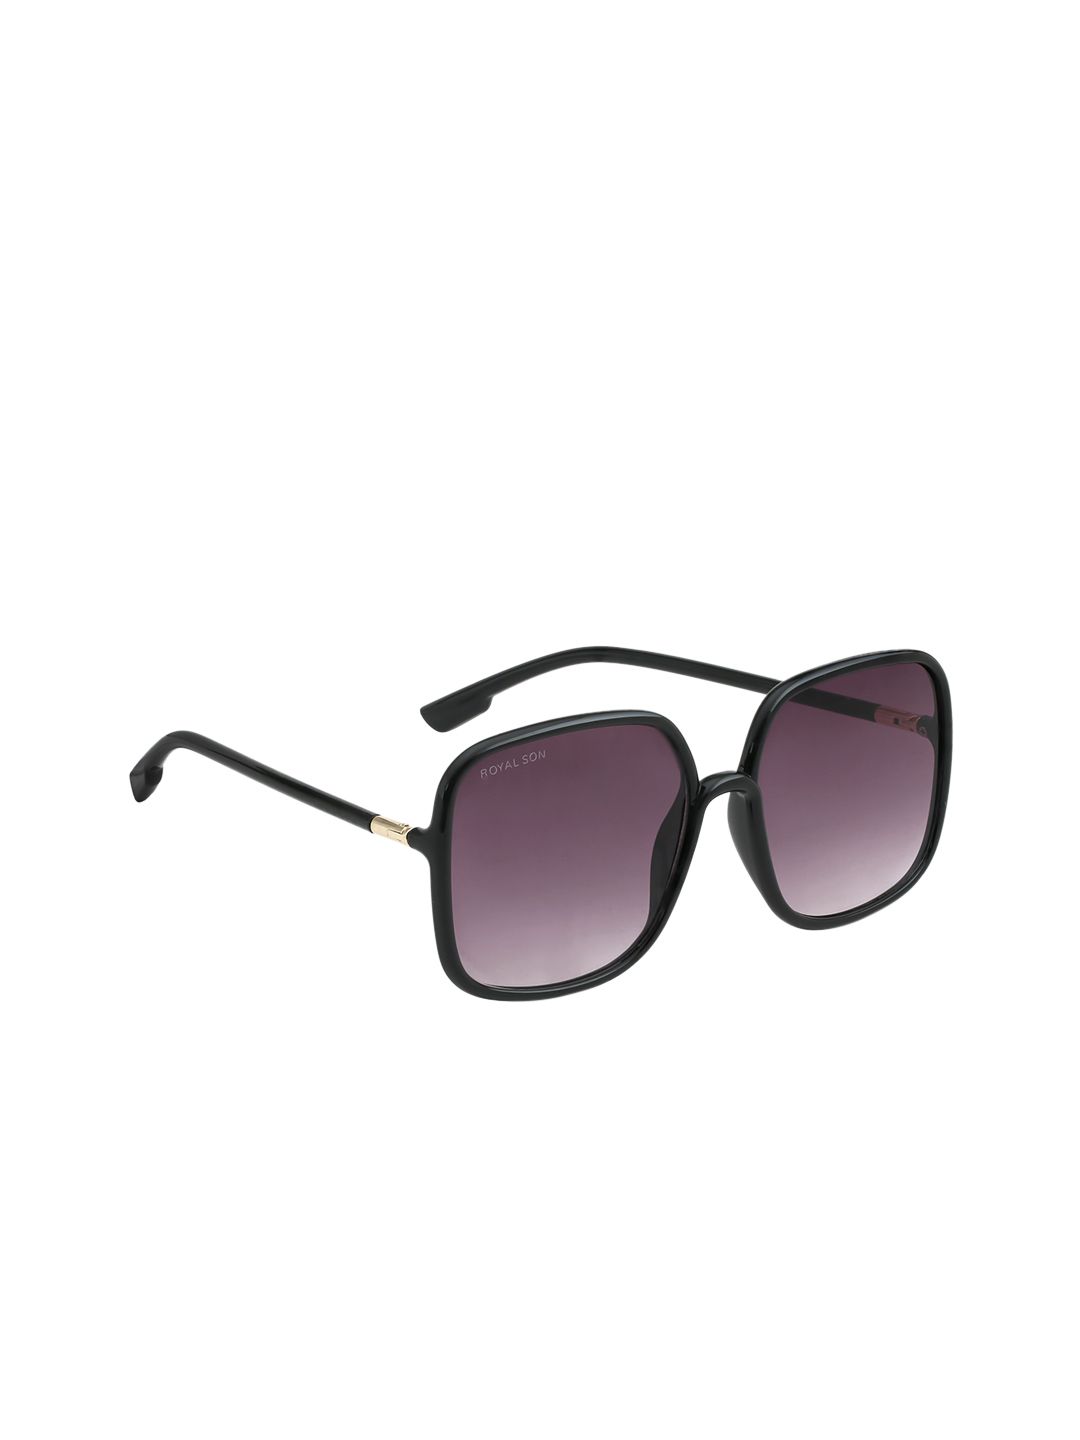 ROYAL SON Women Oversized UV Protected Sunglasses CHI0096-C1 Price in India